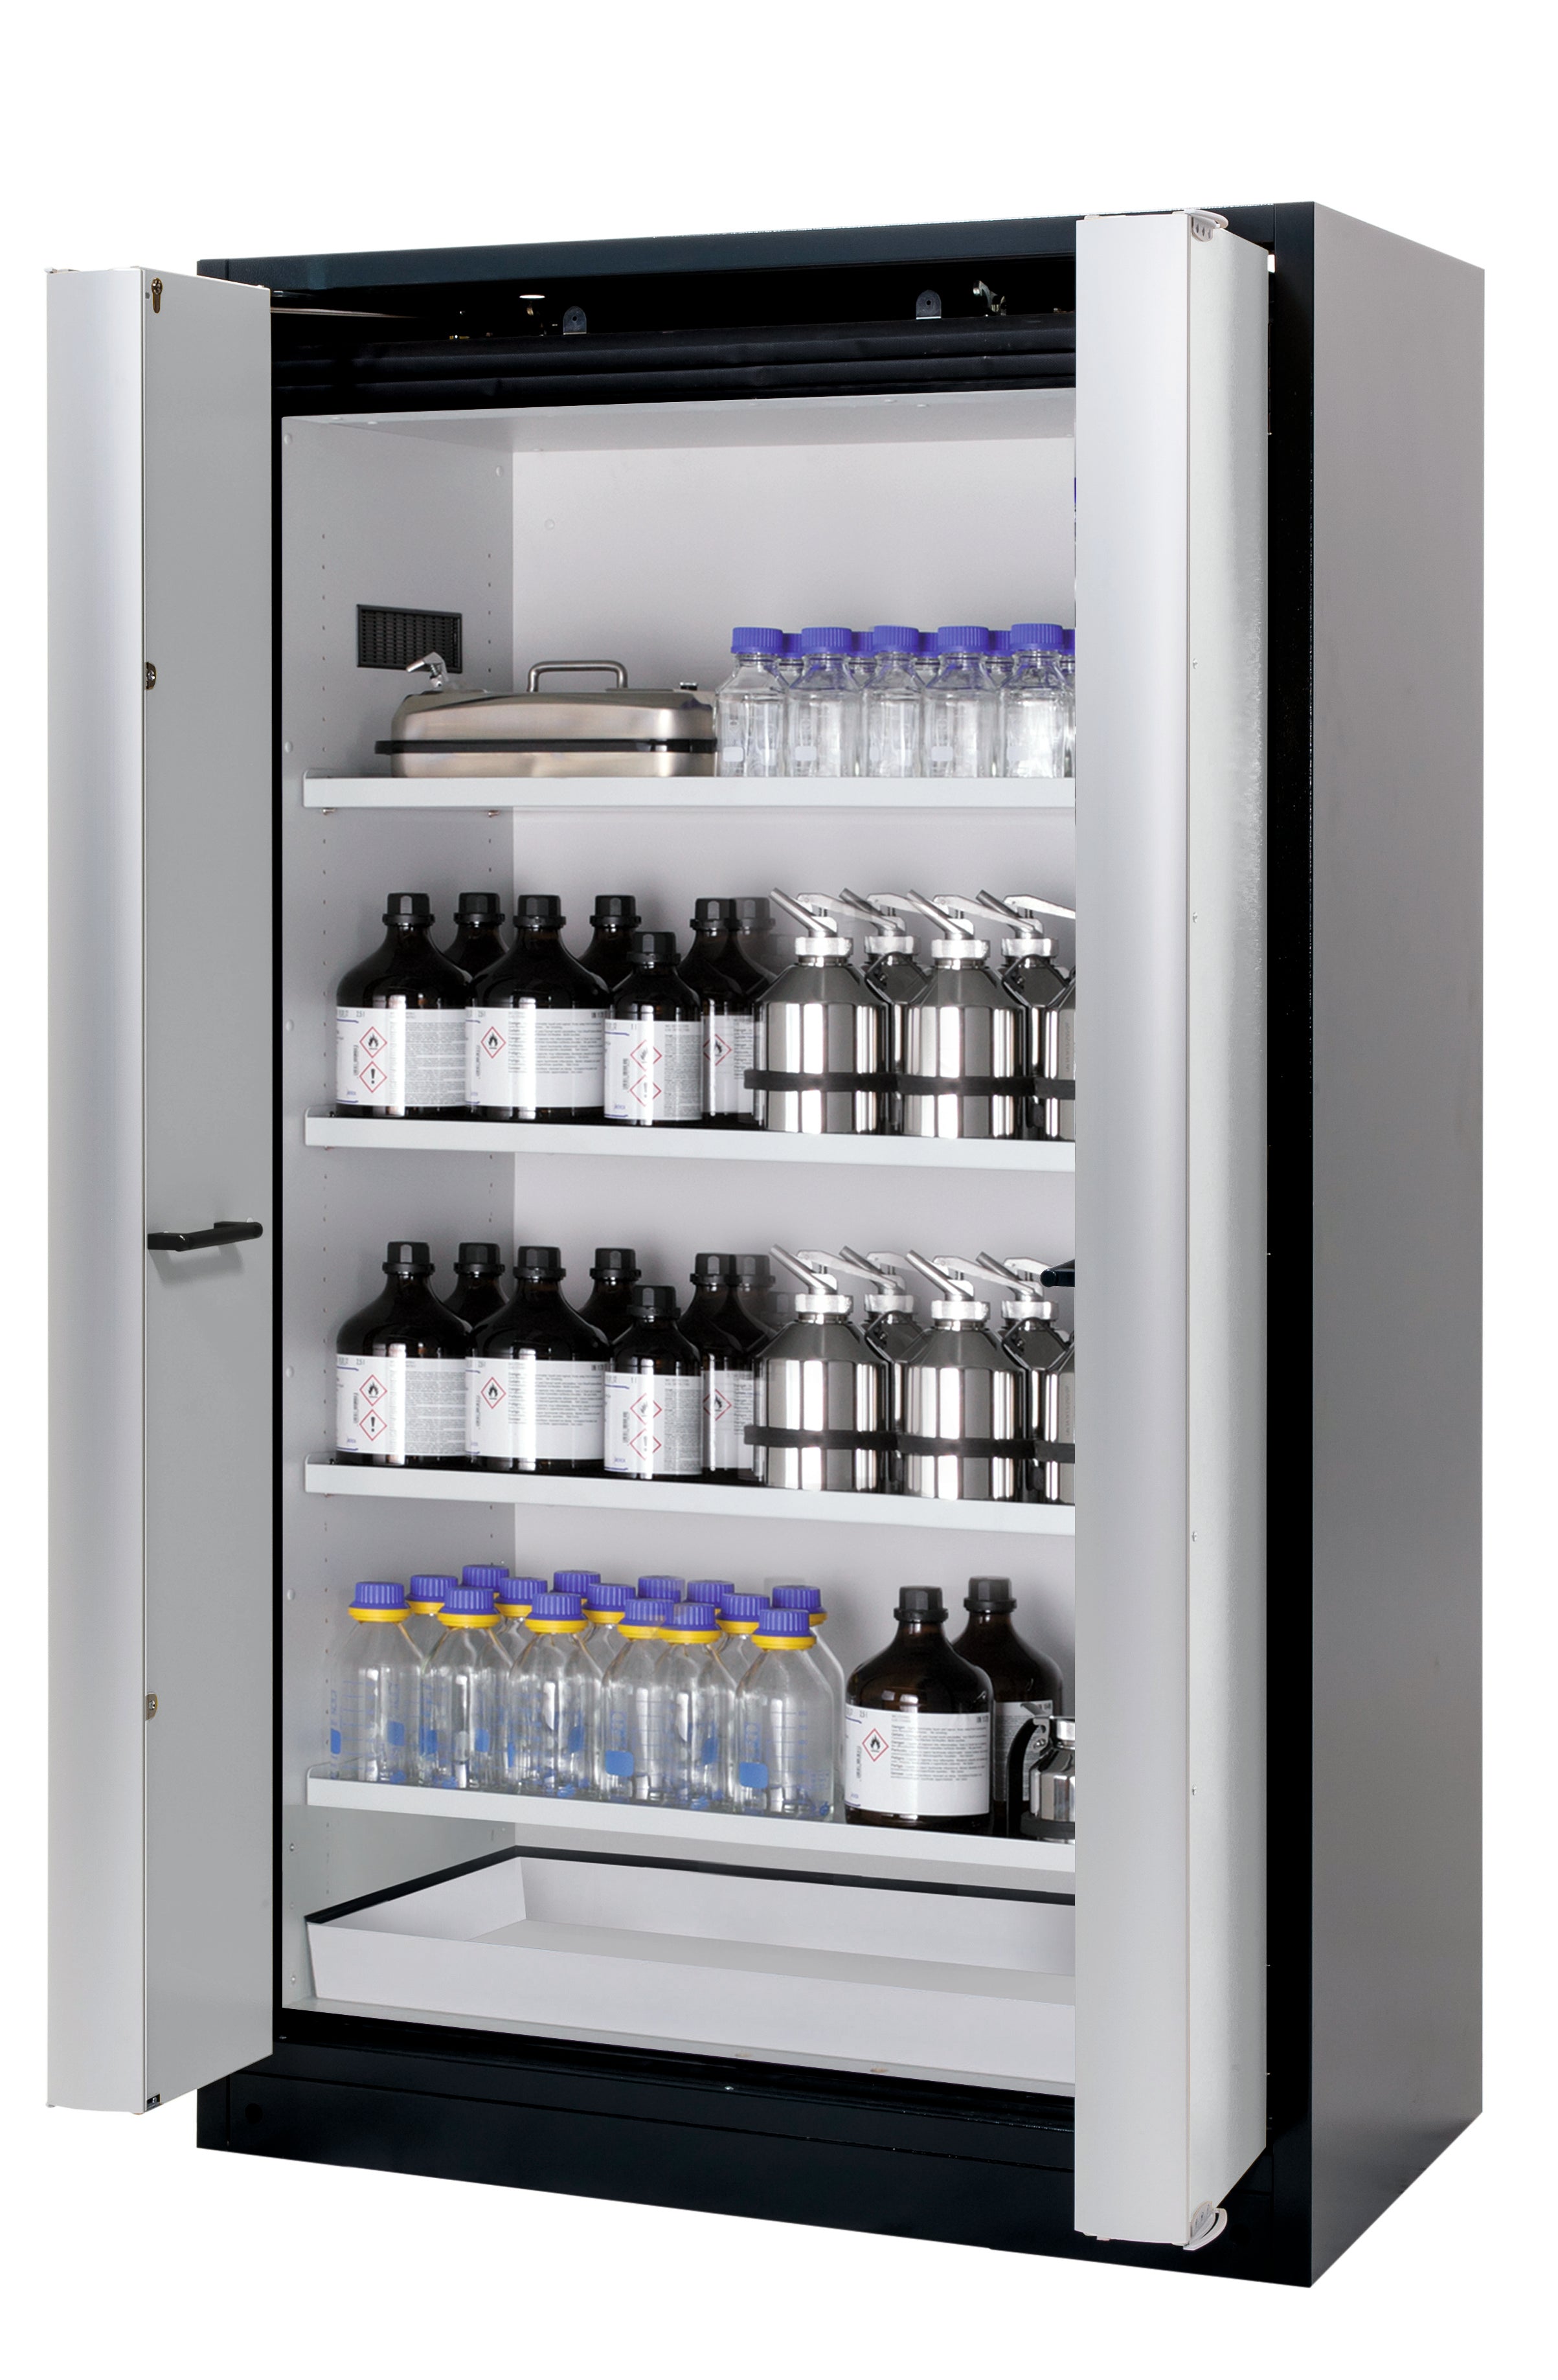 Type 90 safety cabinet Q-PHOENIX-90 model Q90.195.120.FD in light gray RAL 7035 with 4x standard shelves (sheet steel)